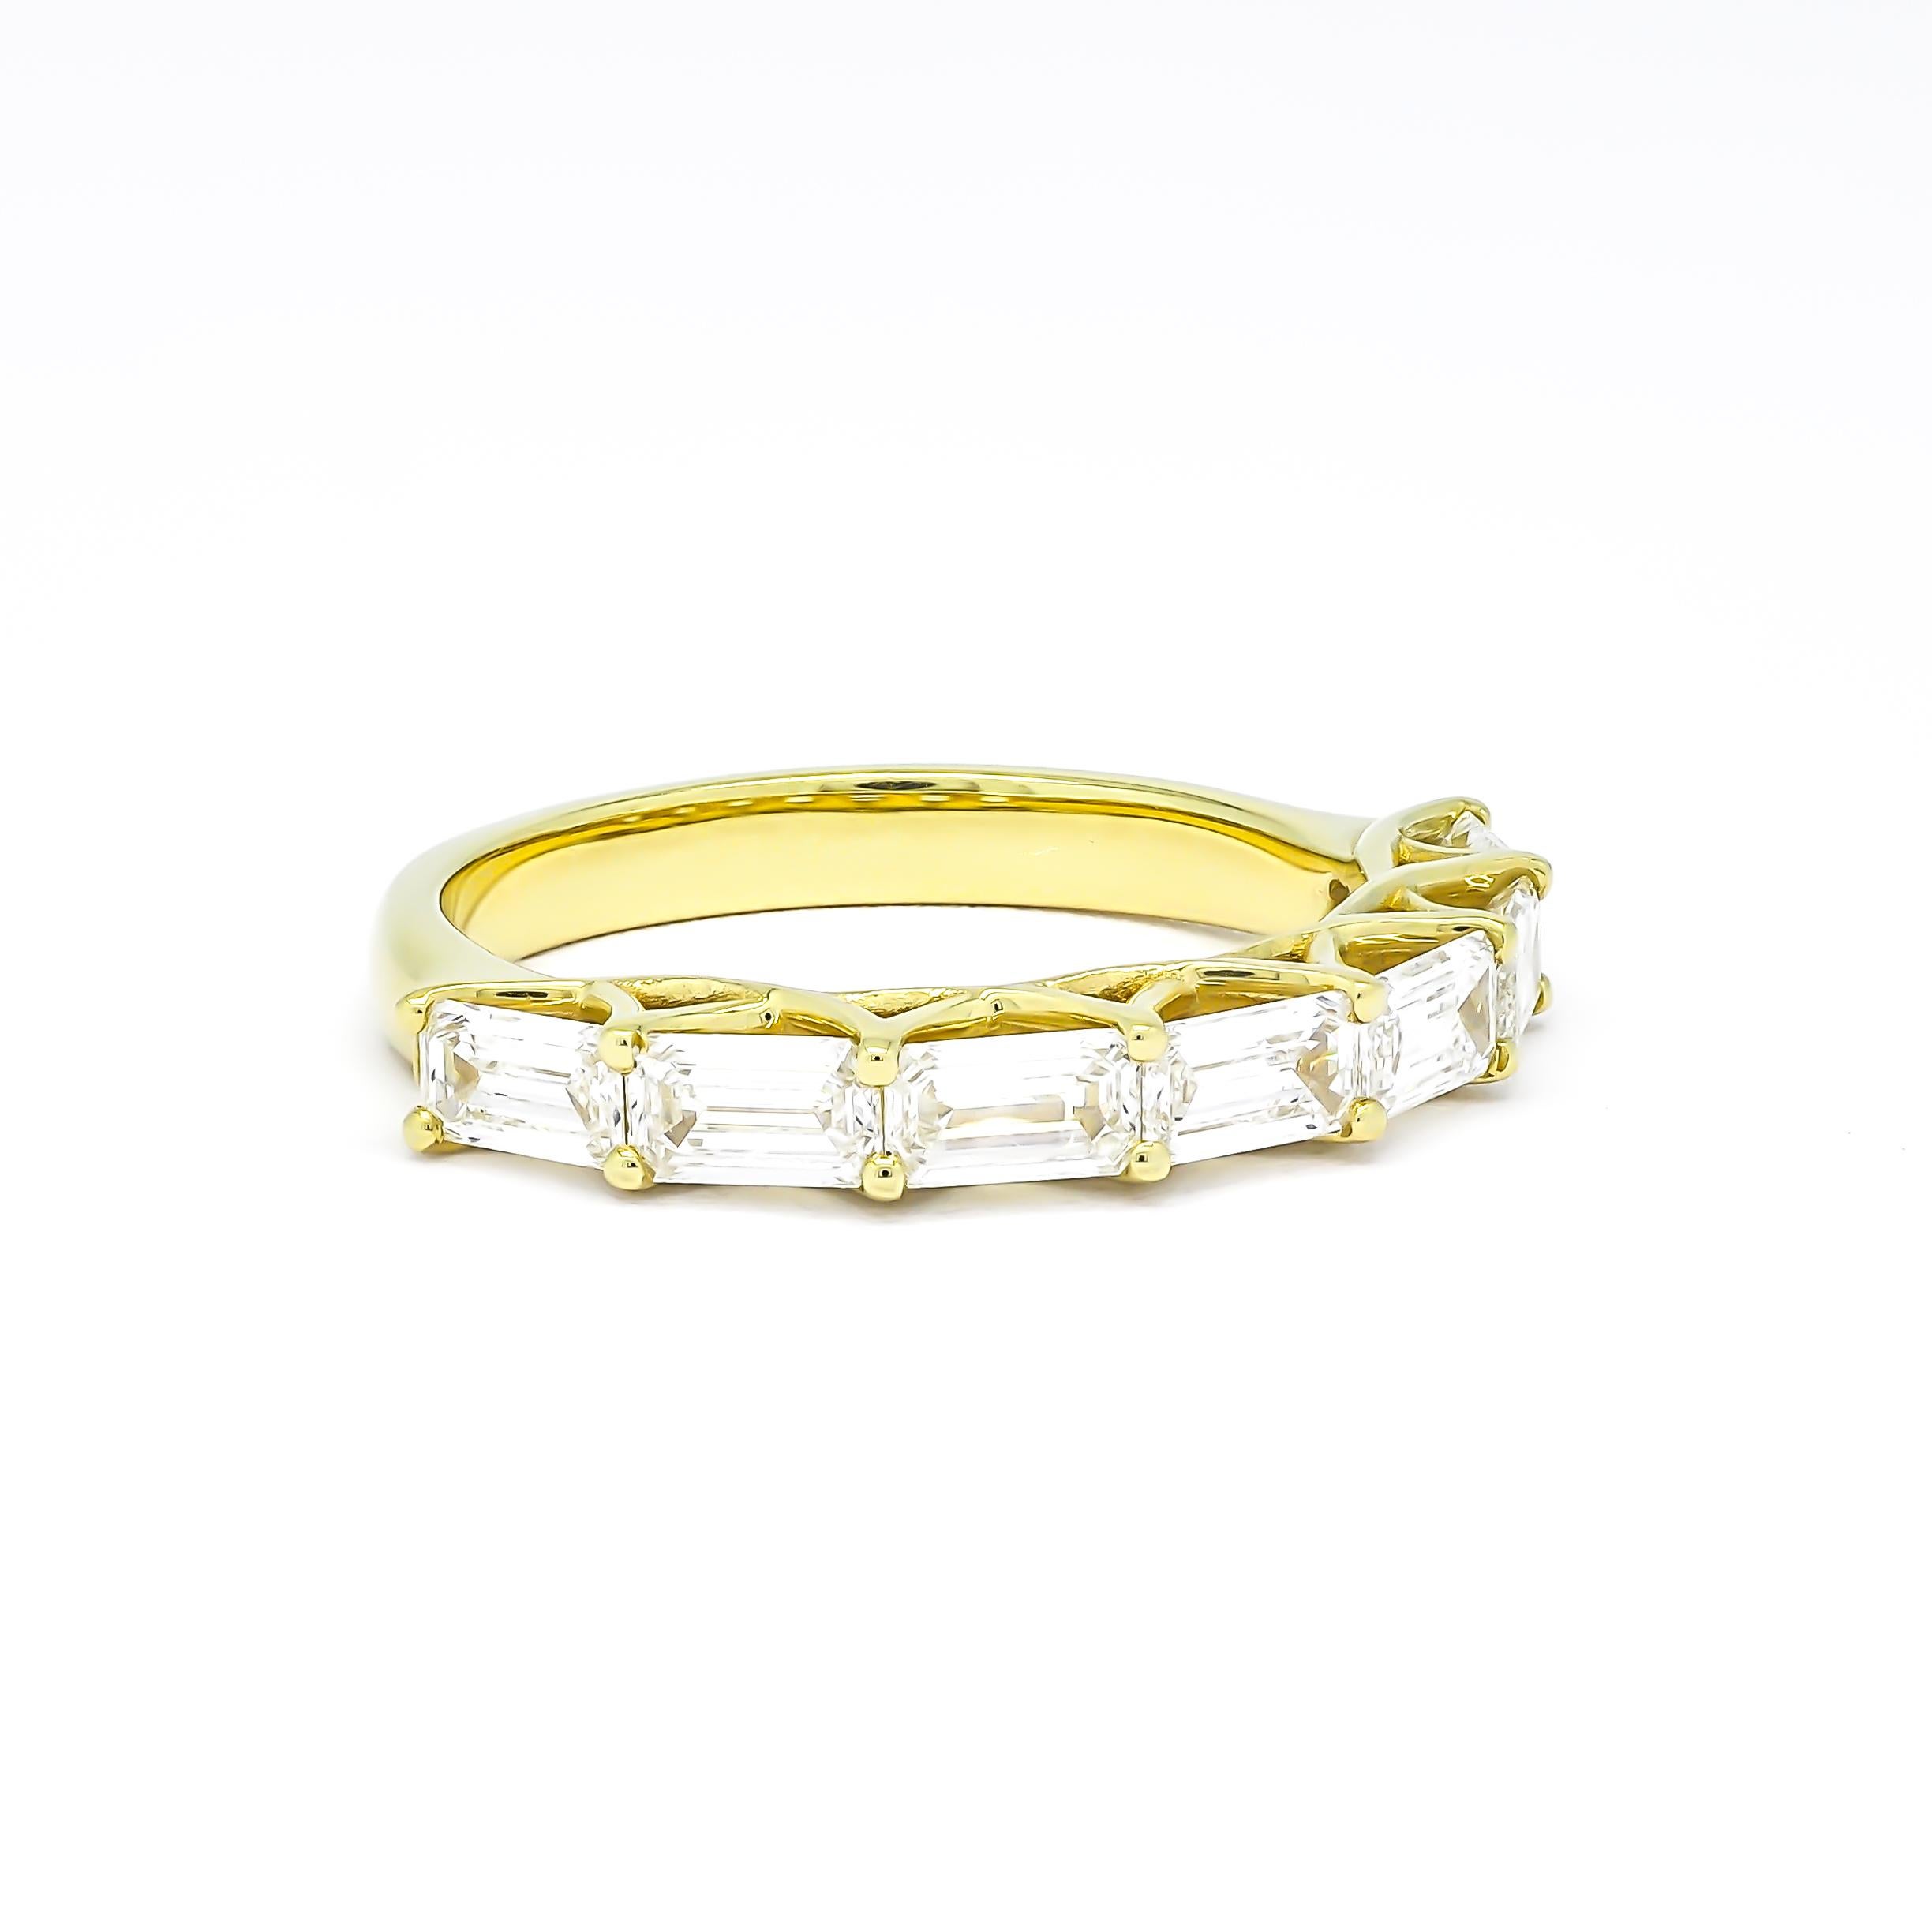 If you're looking for the perfect wedding band to symbolize your love and commitment to your wife, consider a 7 baguette diamond prong 18 kt yellow gold ring. This exquisite piece features seven beautifully cut baguette diamonds set in a secure